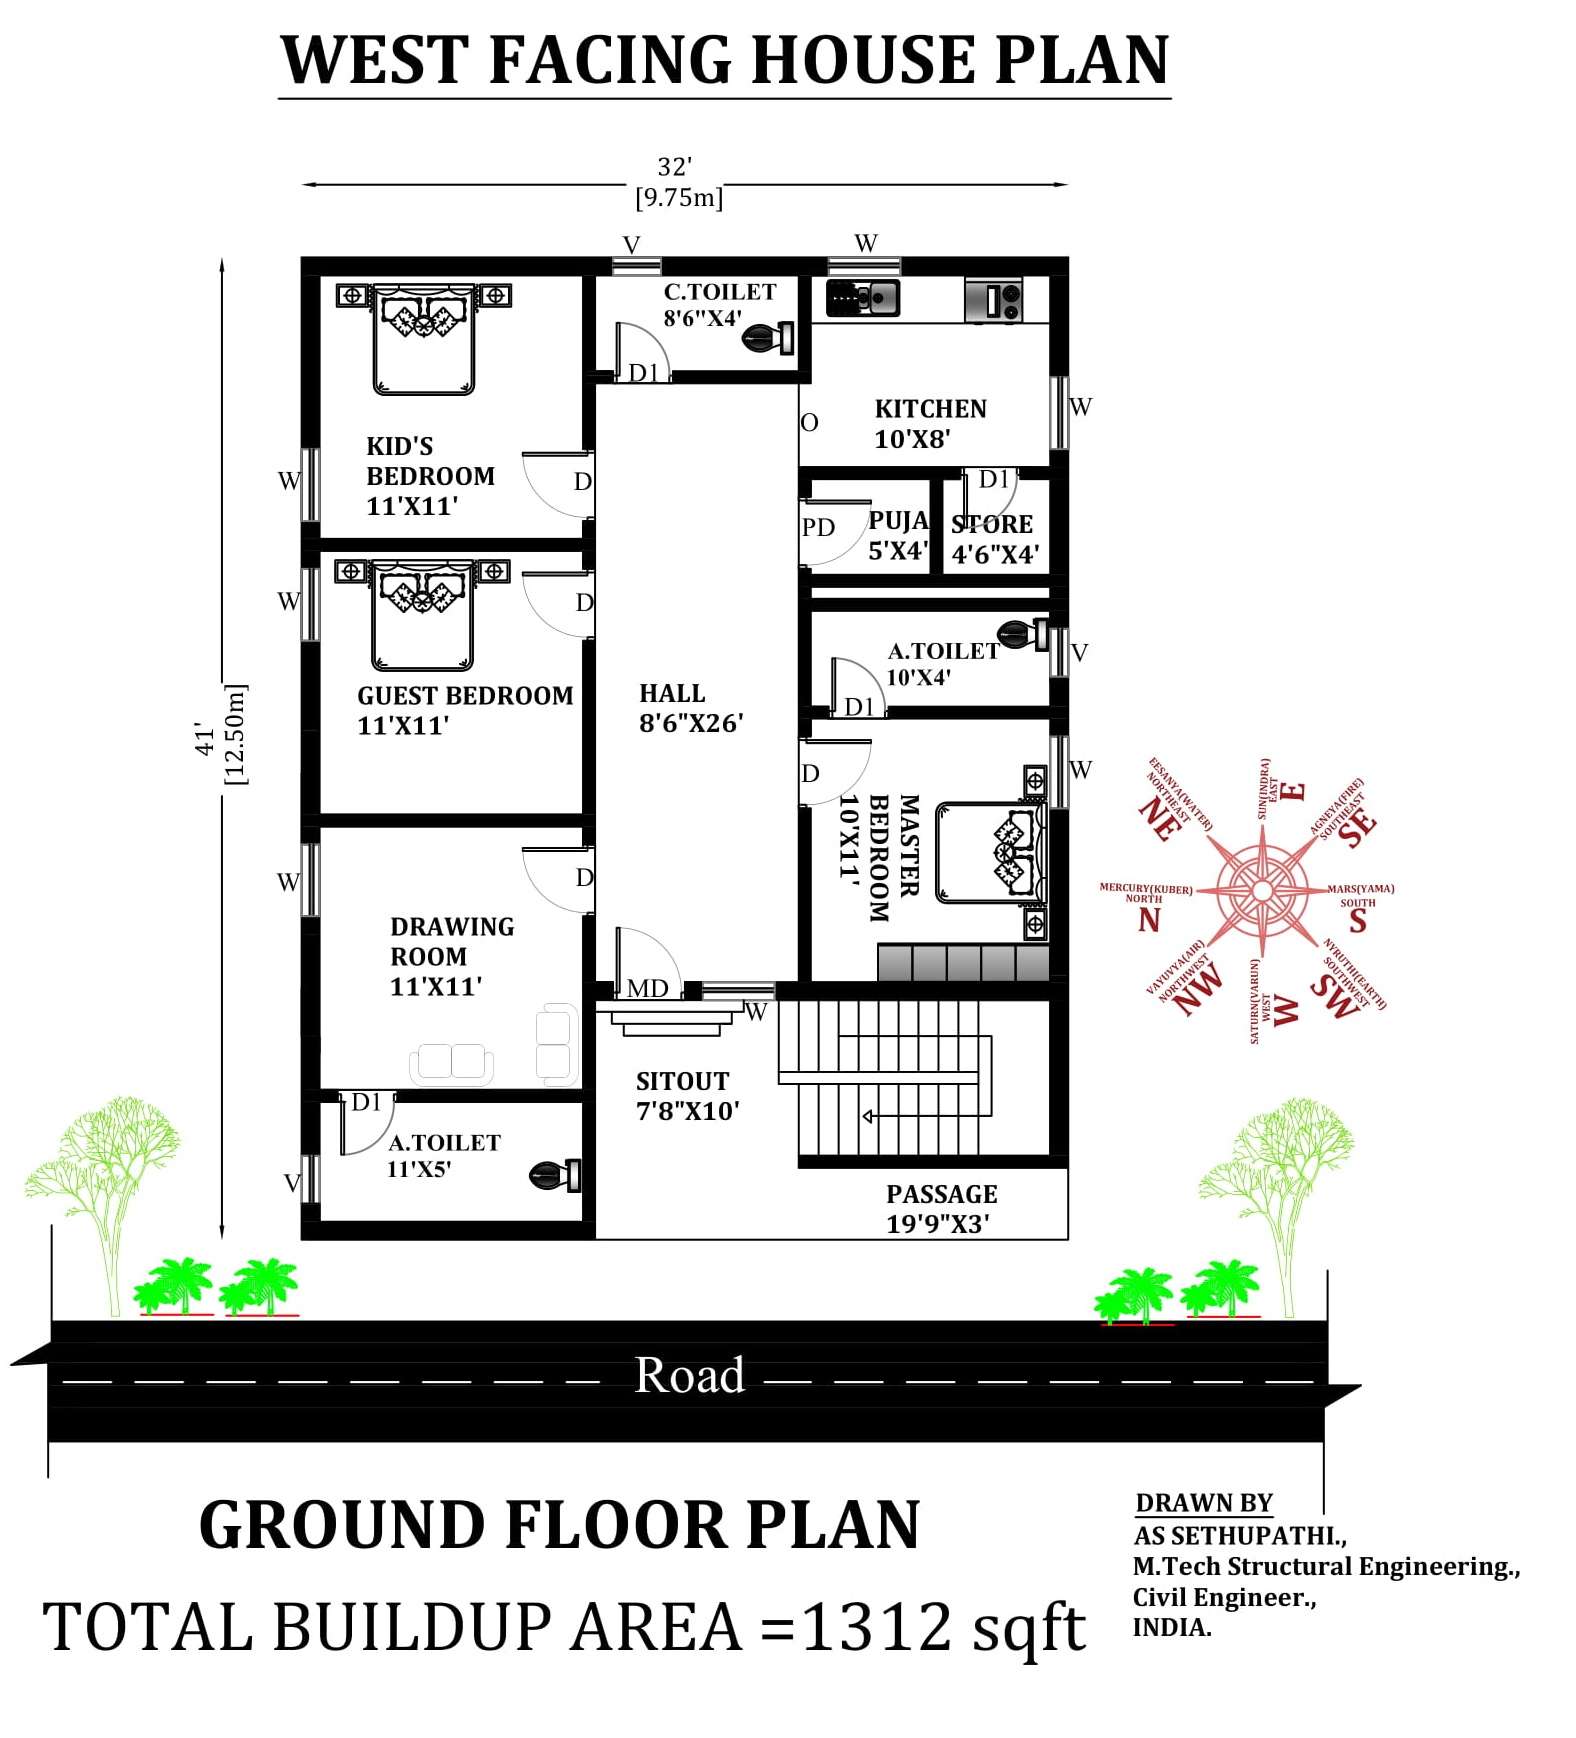 32 X41 West Facing 3bhk House Plan As Per Vastu Shastra Download Autocad File Now Cadbull